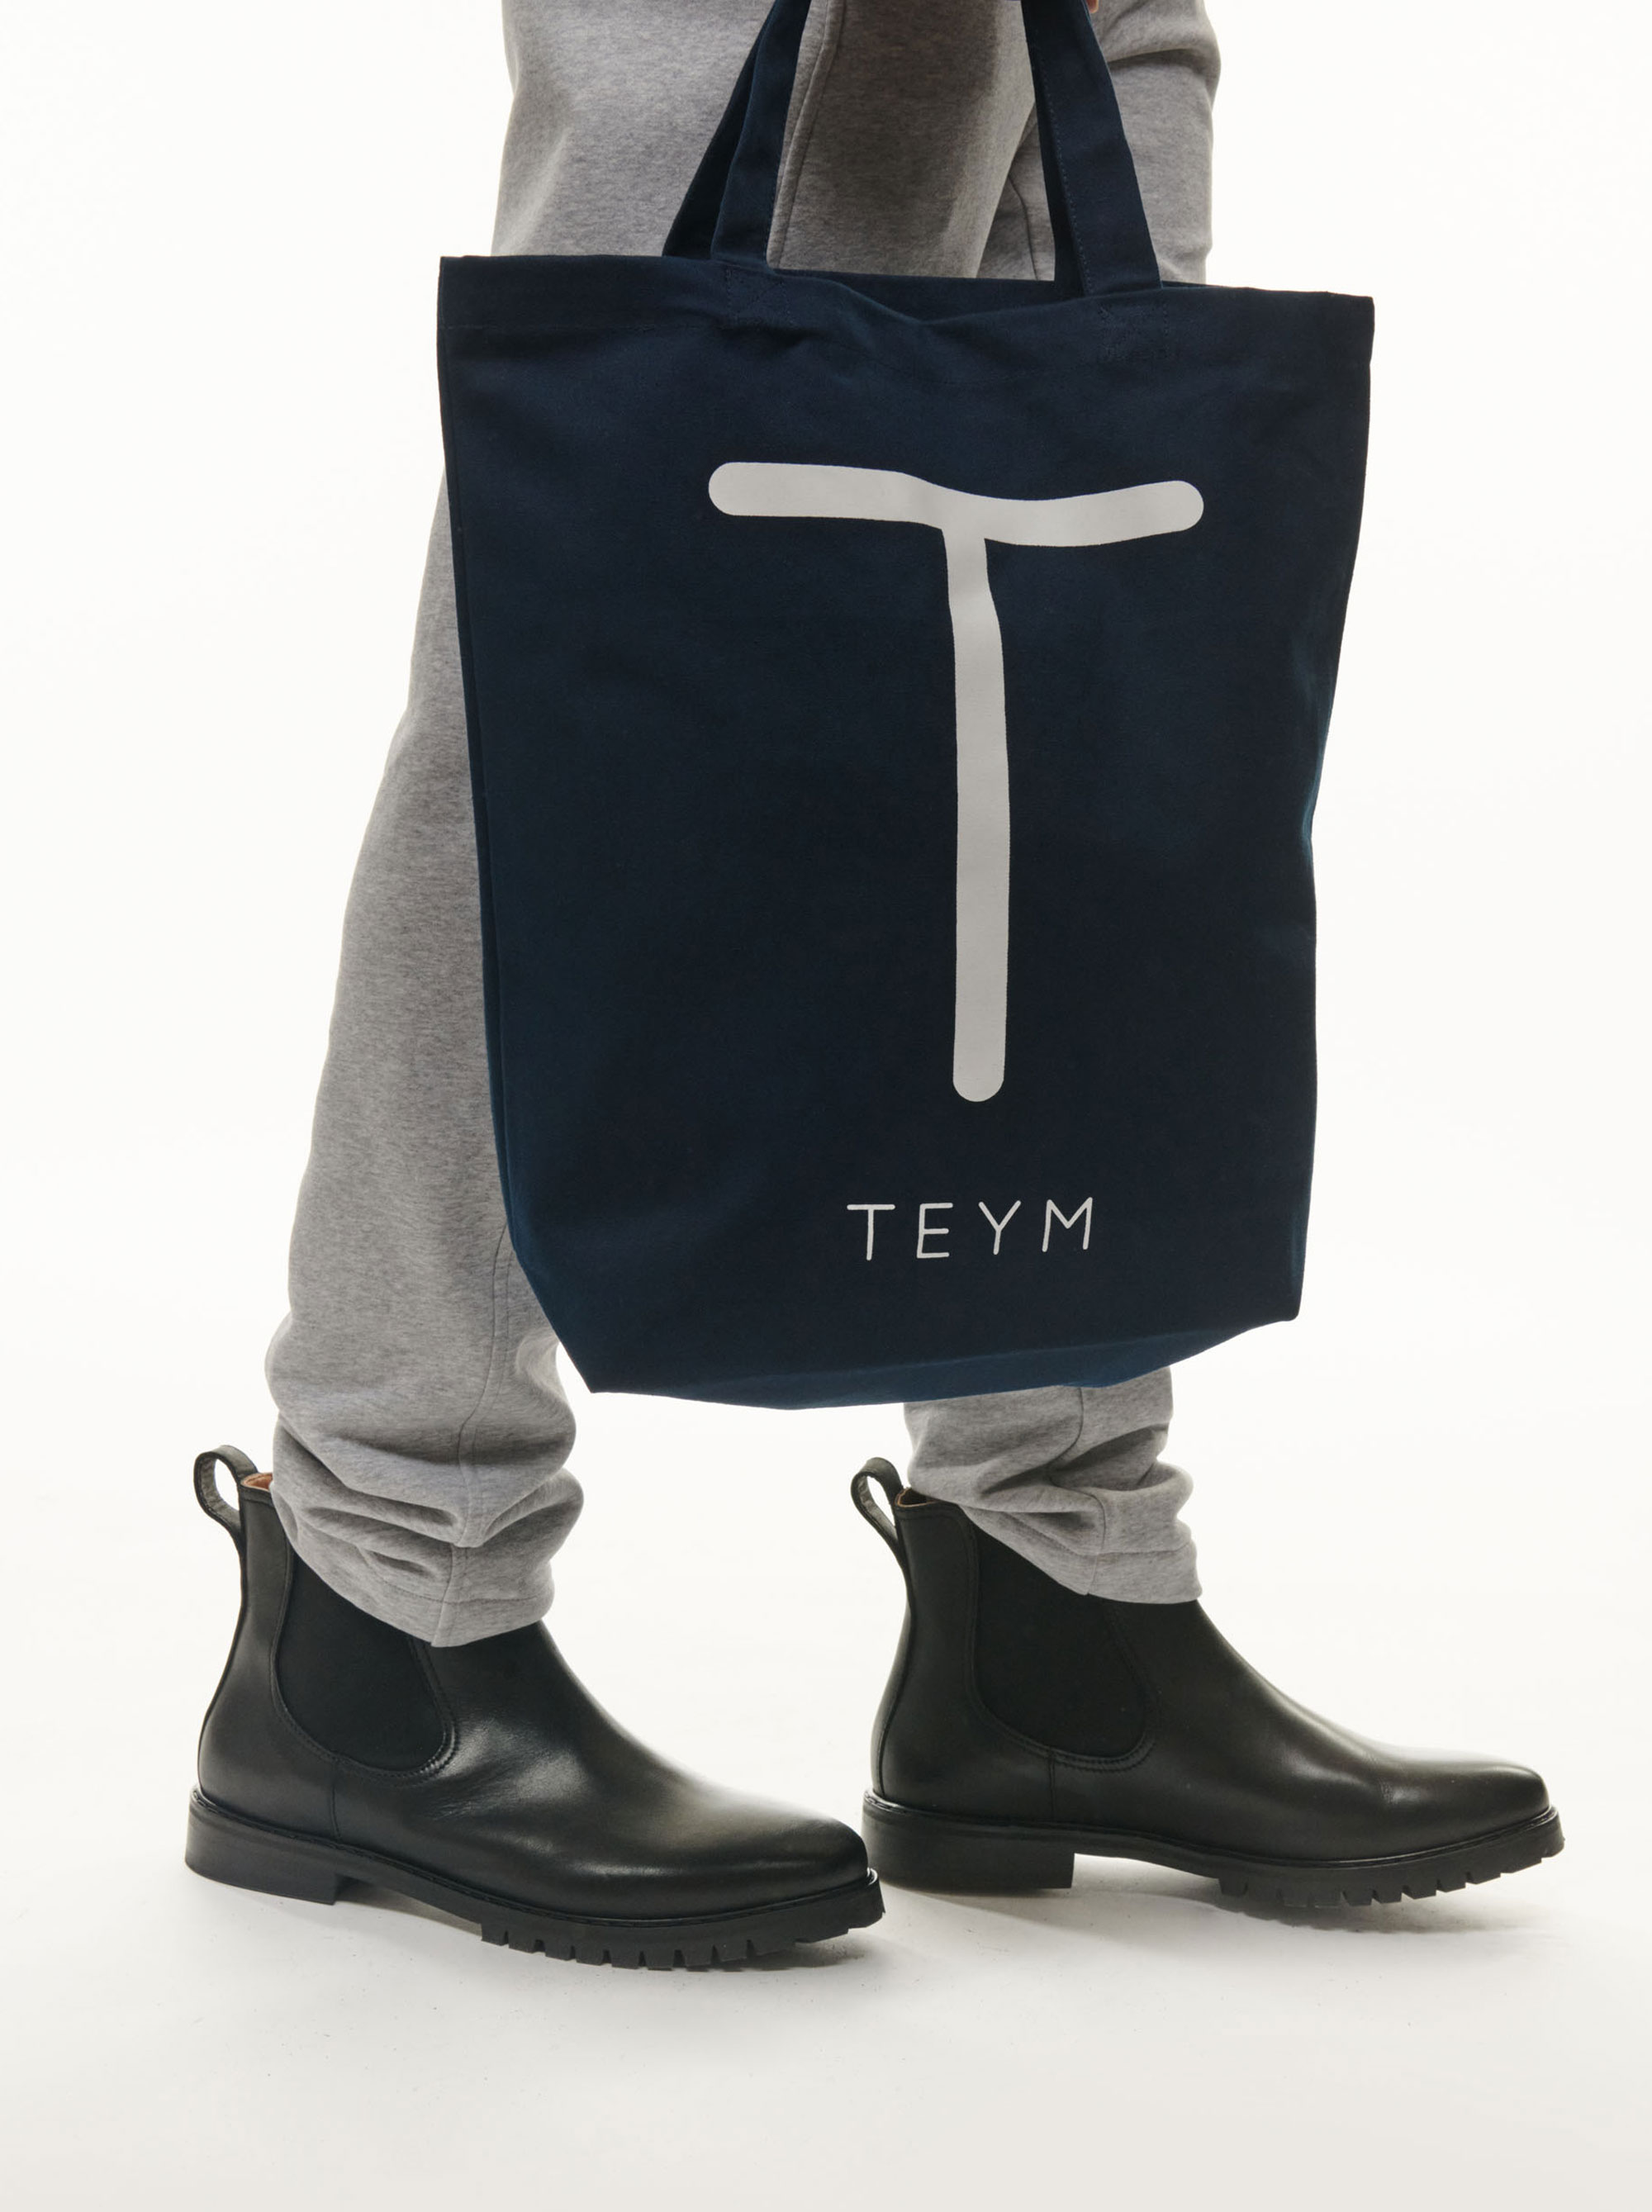 Teym - The Canvas Tote - 3